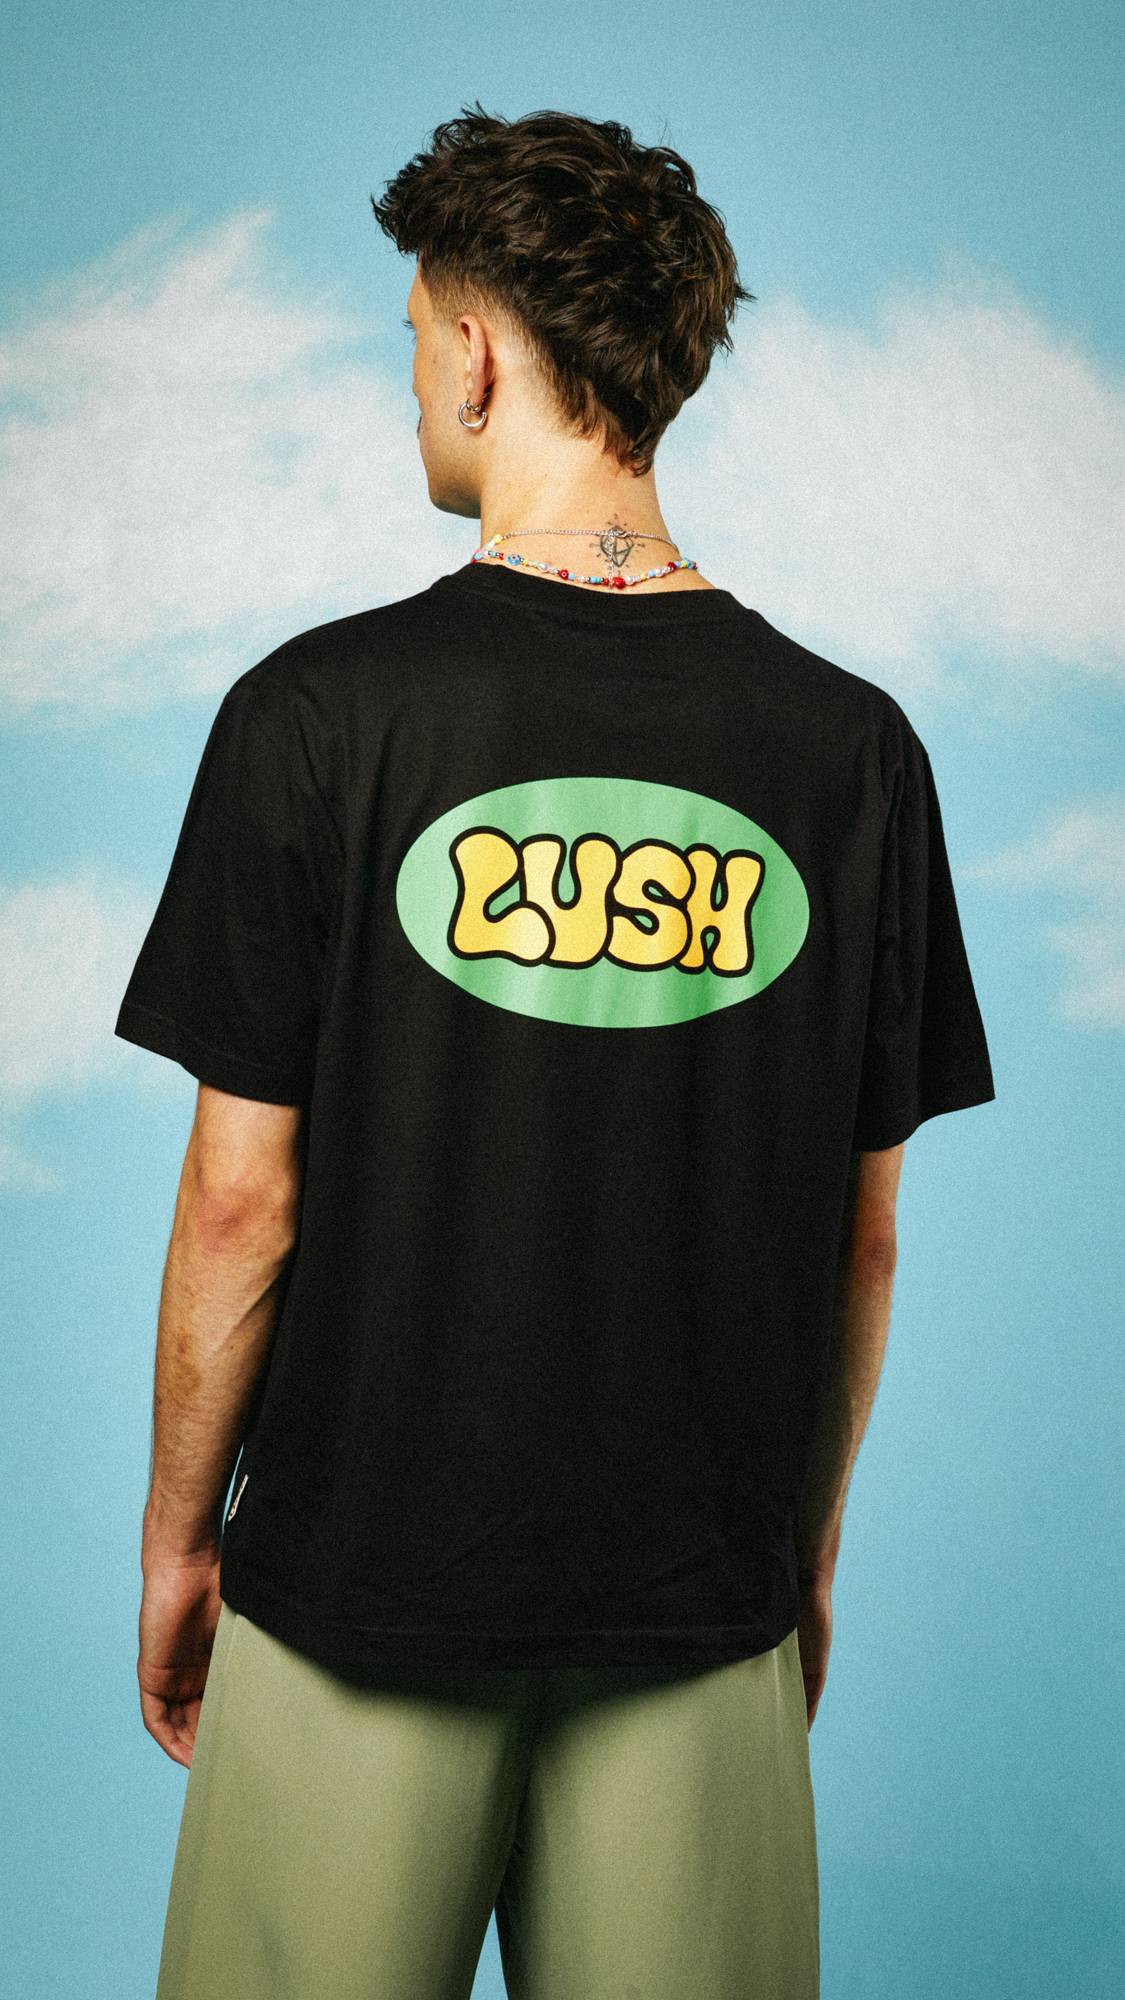 Image shows the back of the t-shirt as the model faces away. The t-shirt back has a large, central retro LUSH logo. 